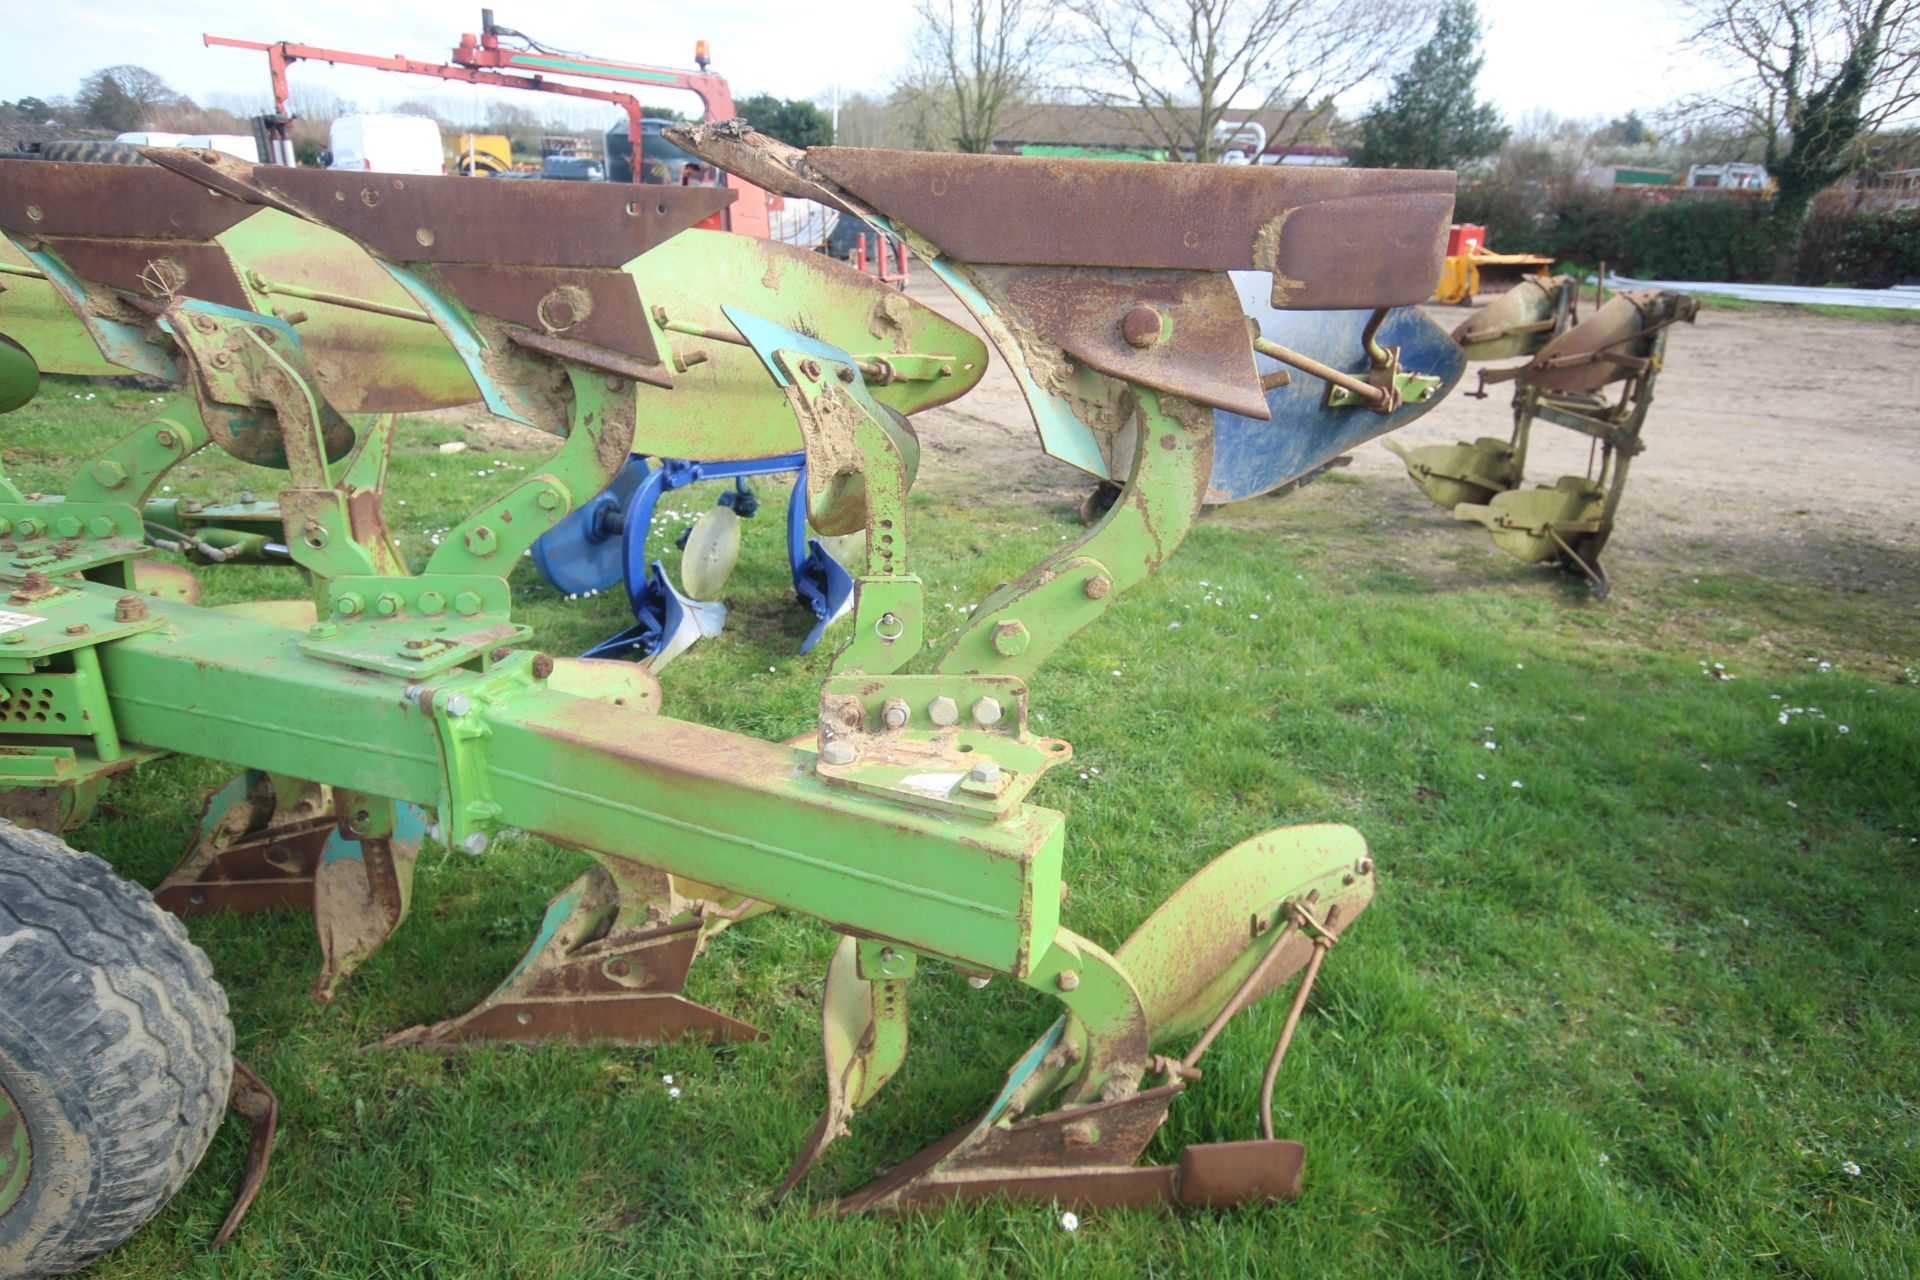 Dowdeswell 140 MA 5+1F reversible plough. With hydraulic press arm. Refurbished by Agri-Hire 2019. - Image 18 of 25